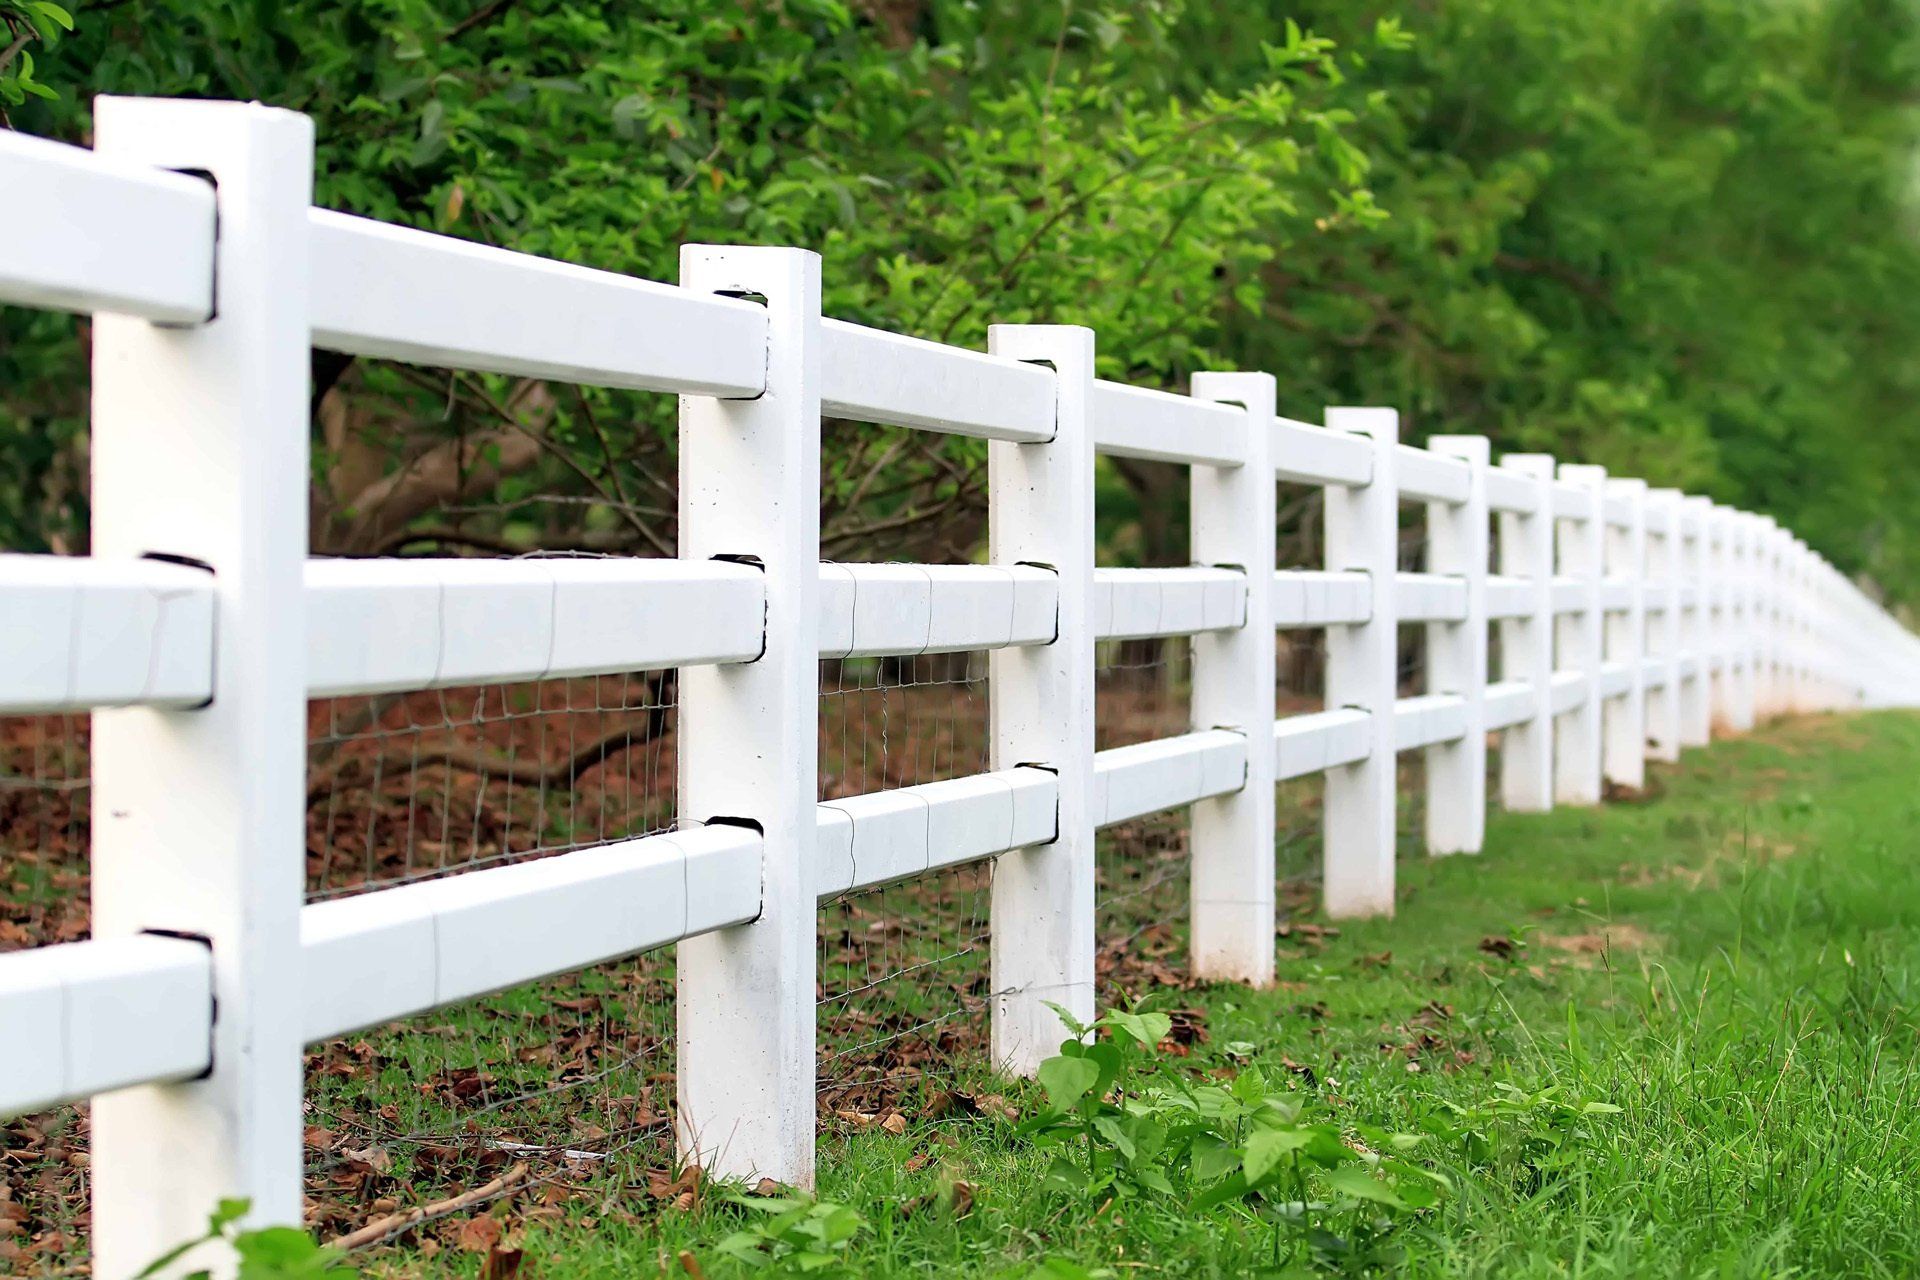 Vinyl fence is a robust fencing solution